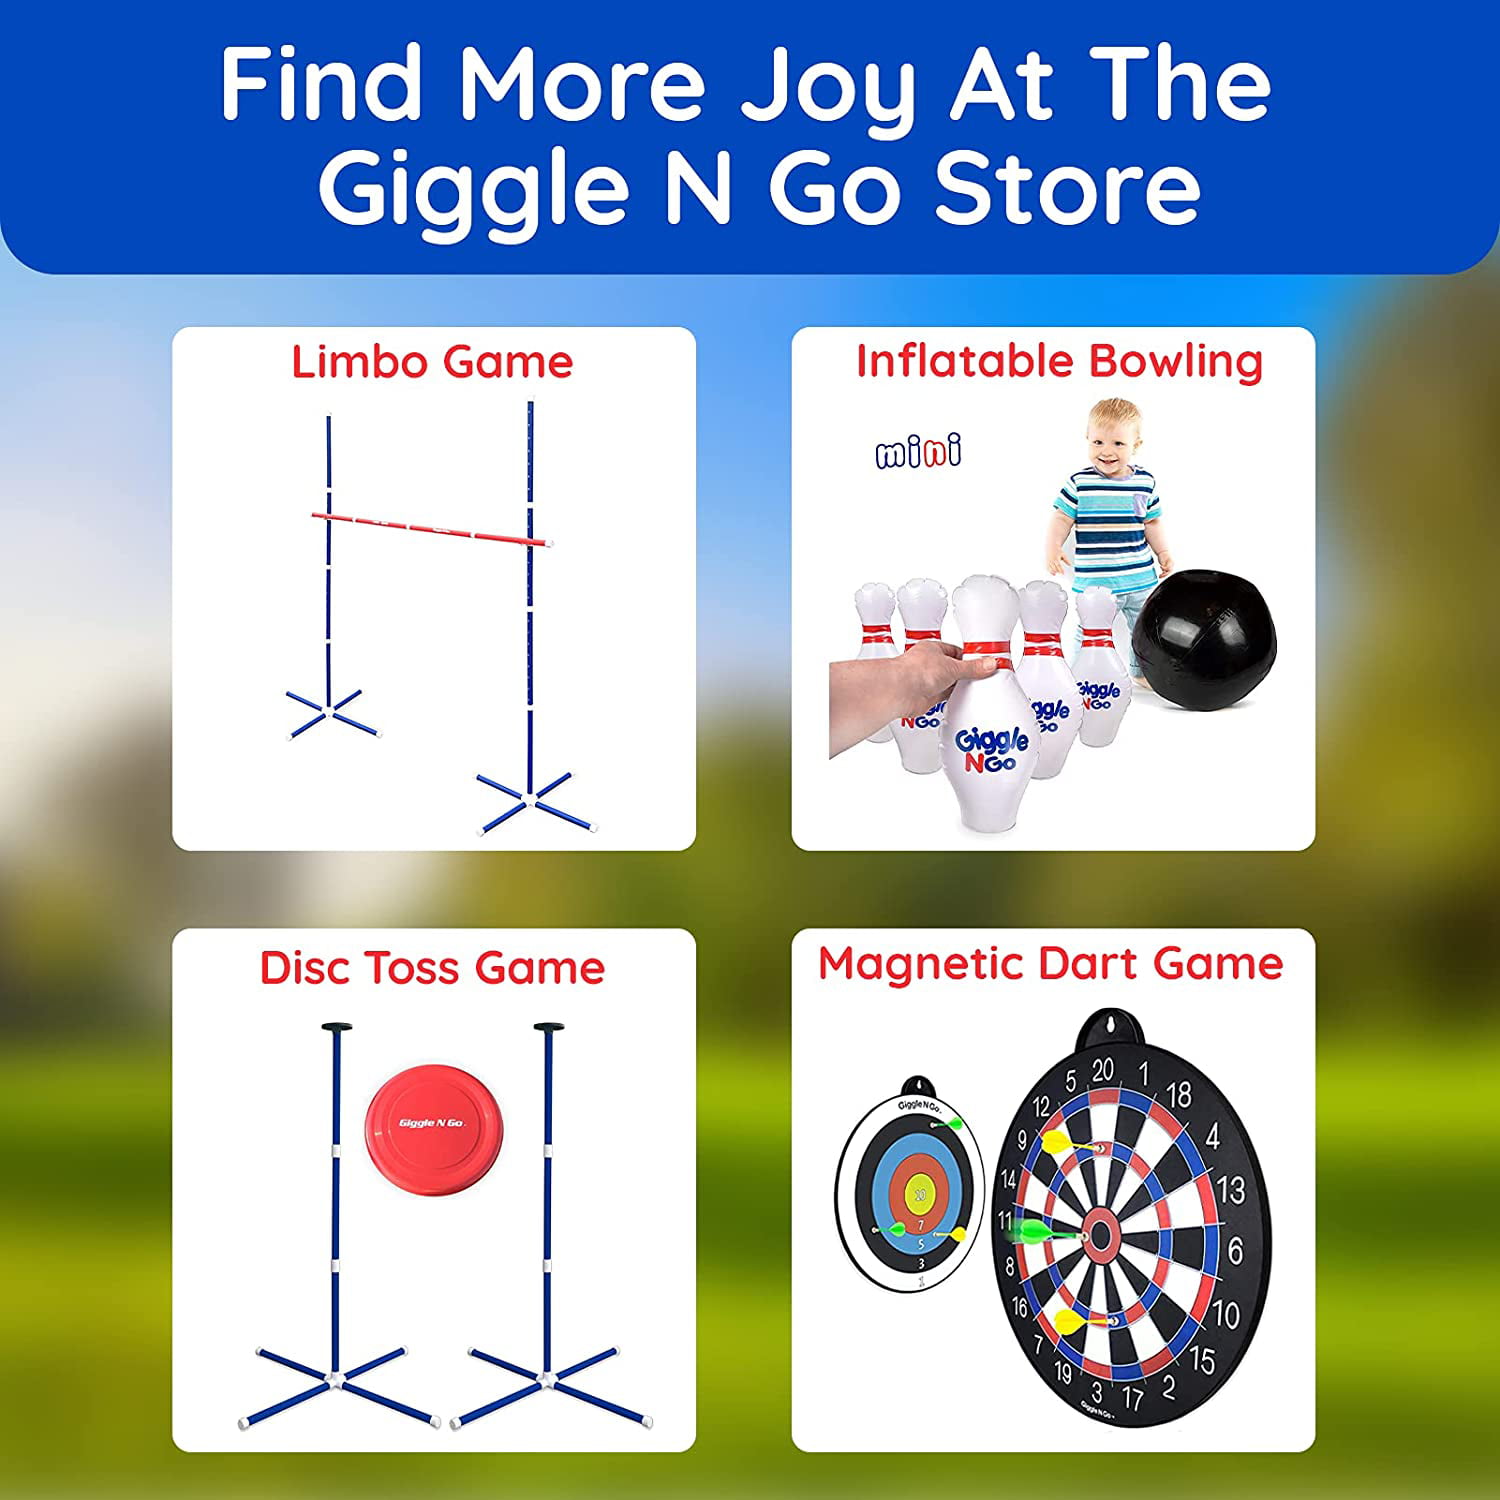 Giggle N Go Outdoor Games - The Original Flarts Floor and Yard Darts Game